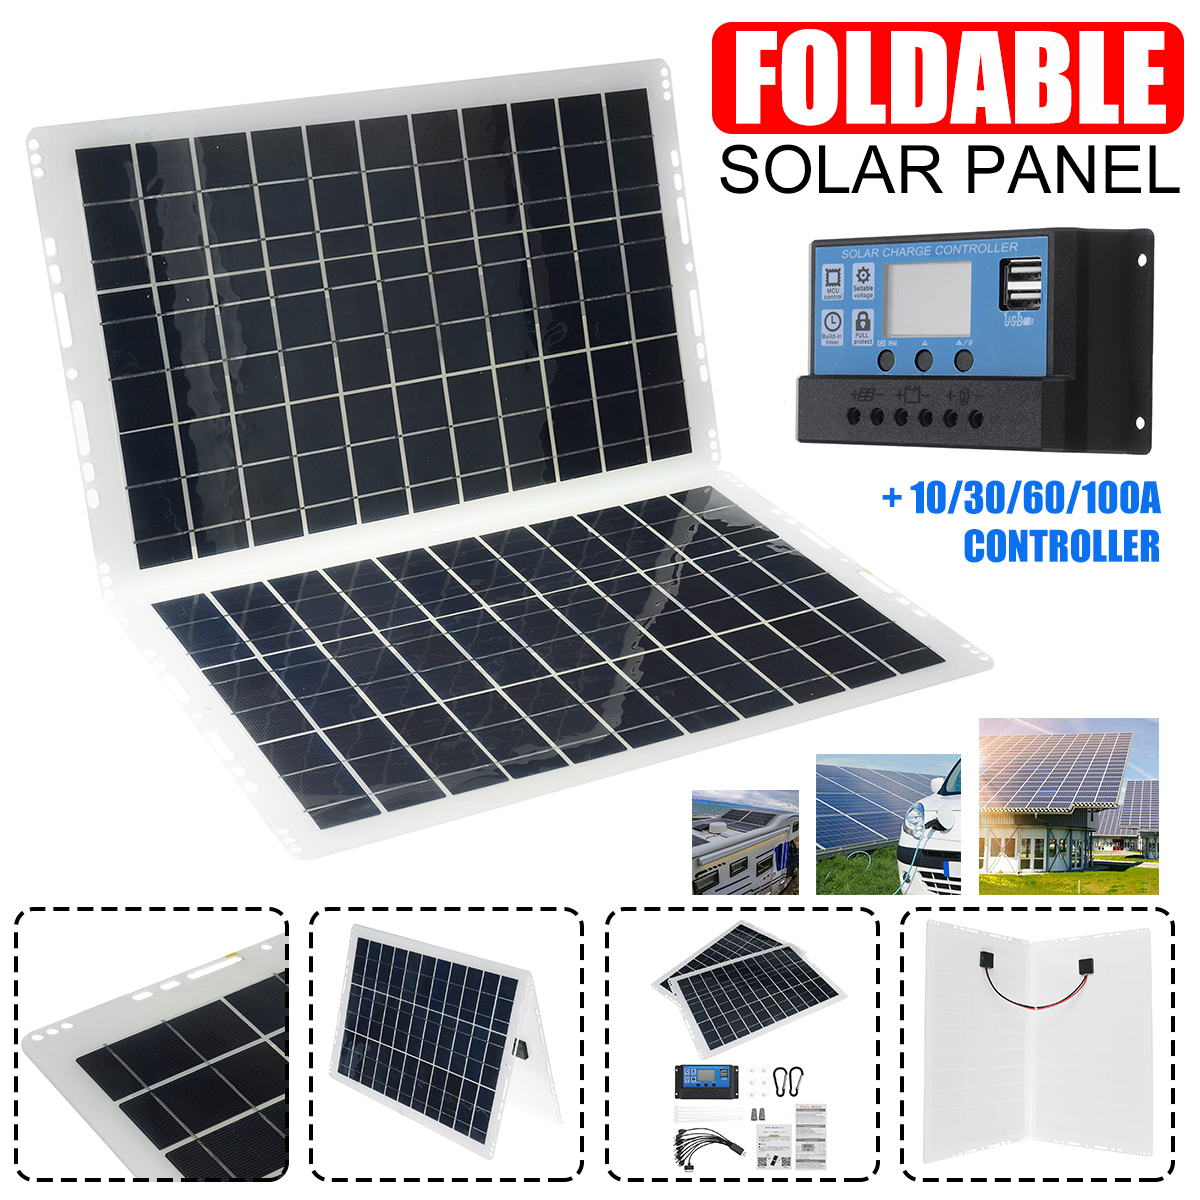 Portable-Solar-Panel-Kit-10A30A60A100A-USB-Battery-Charger-for-Outdoor-Camping-Travel-Caravan-Van-Bo-1856163-2